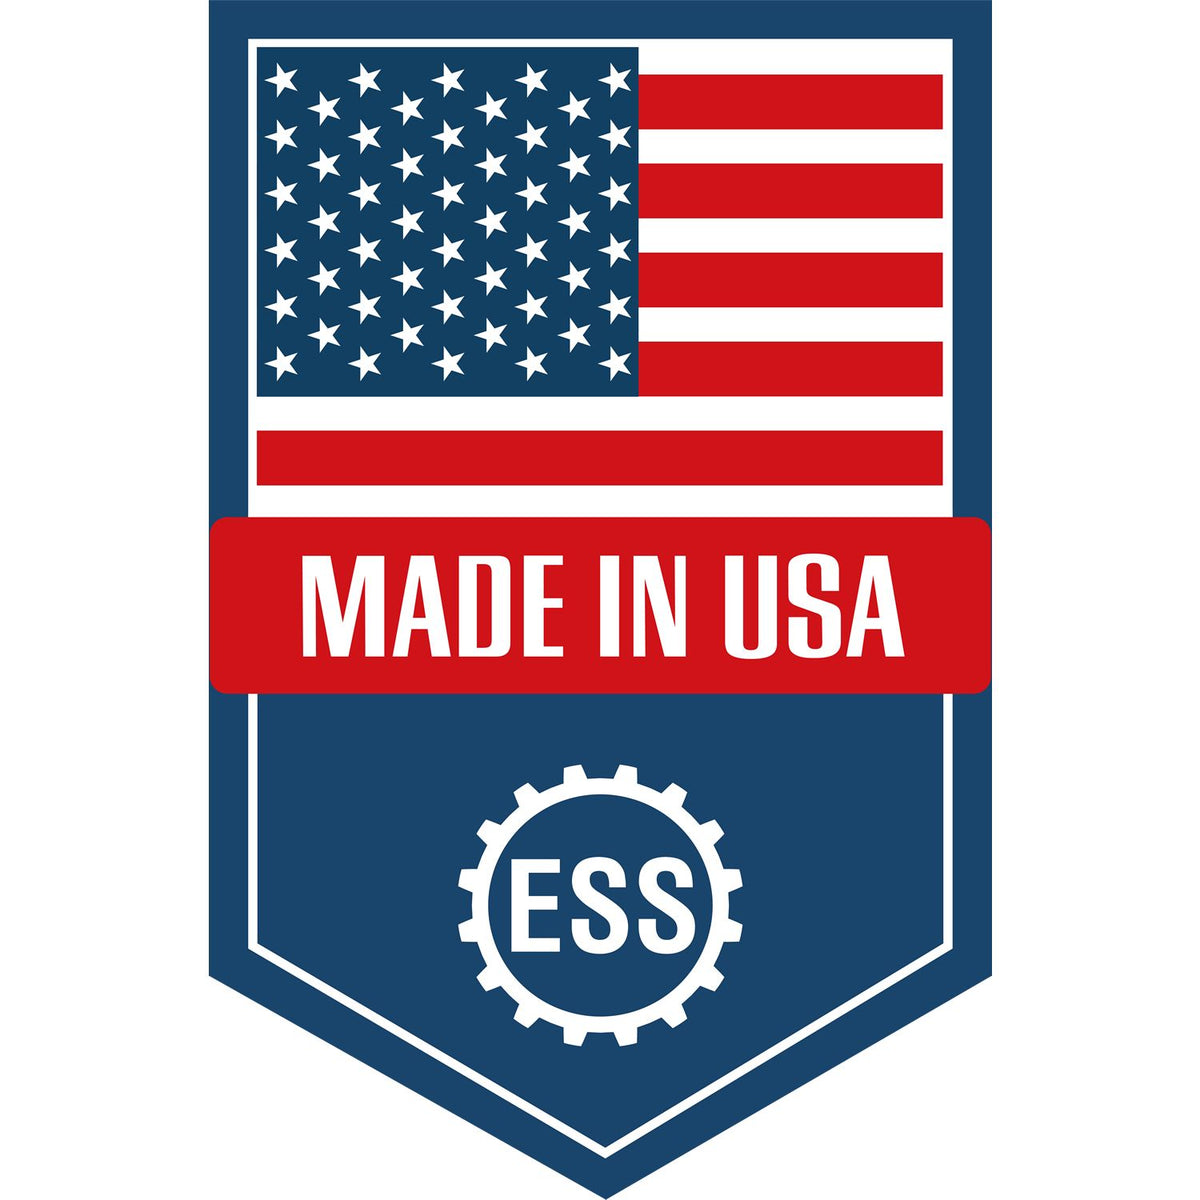 An icon or graphic with an american flag and text reading Made in USA for the Washington Landscape Architectural Seal Stamp